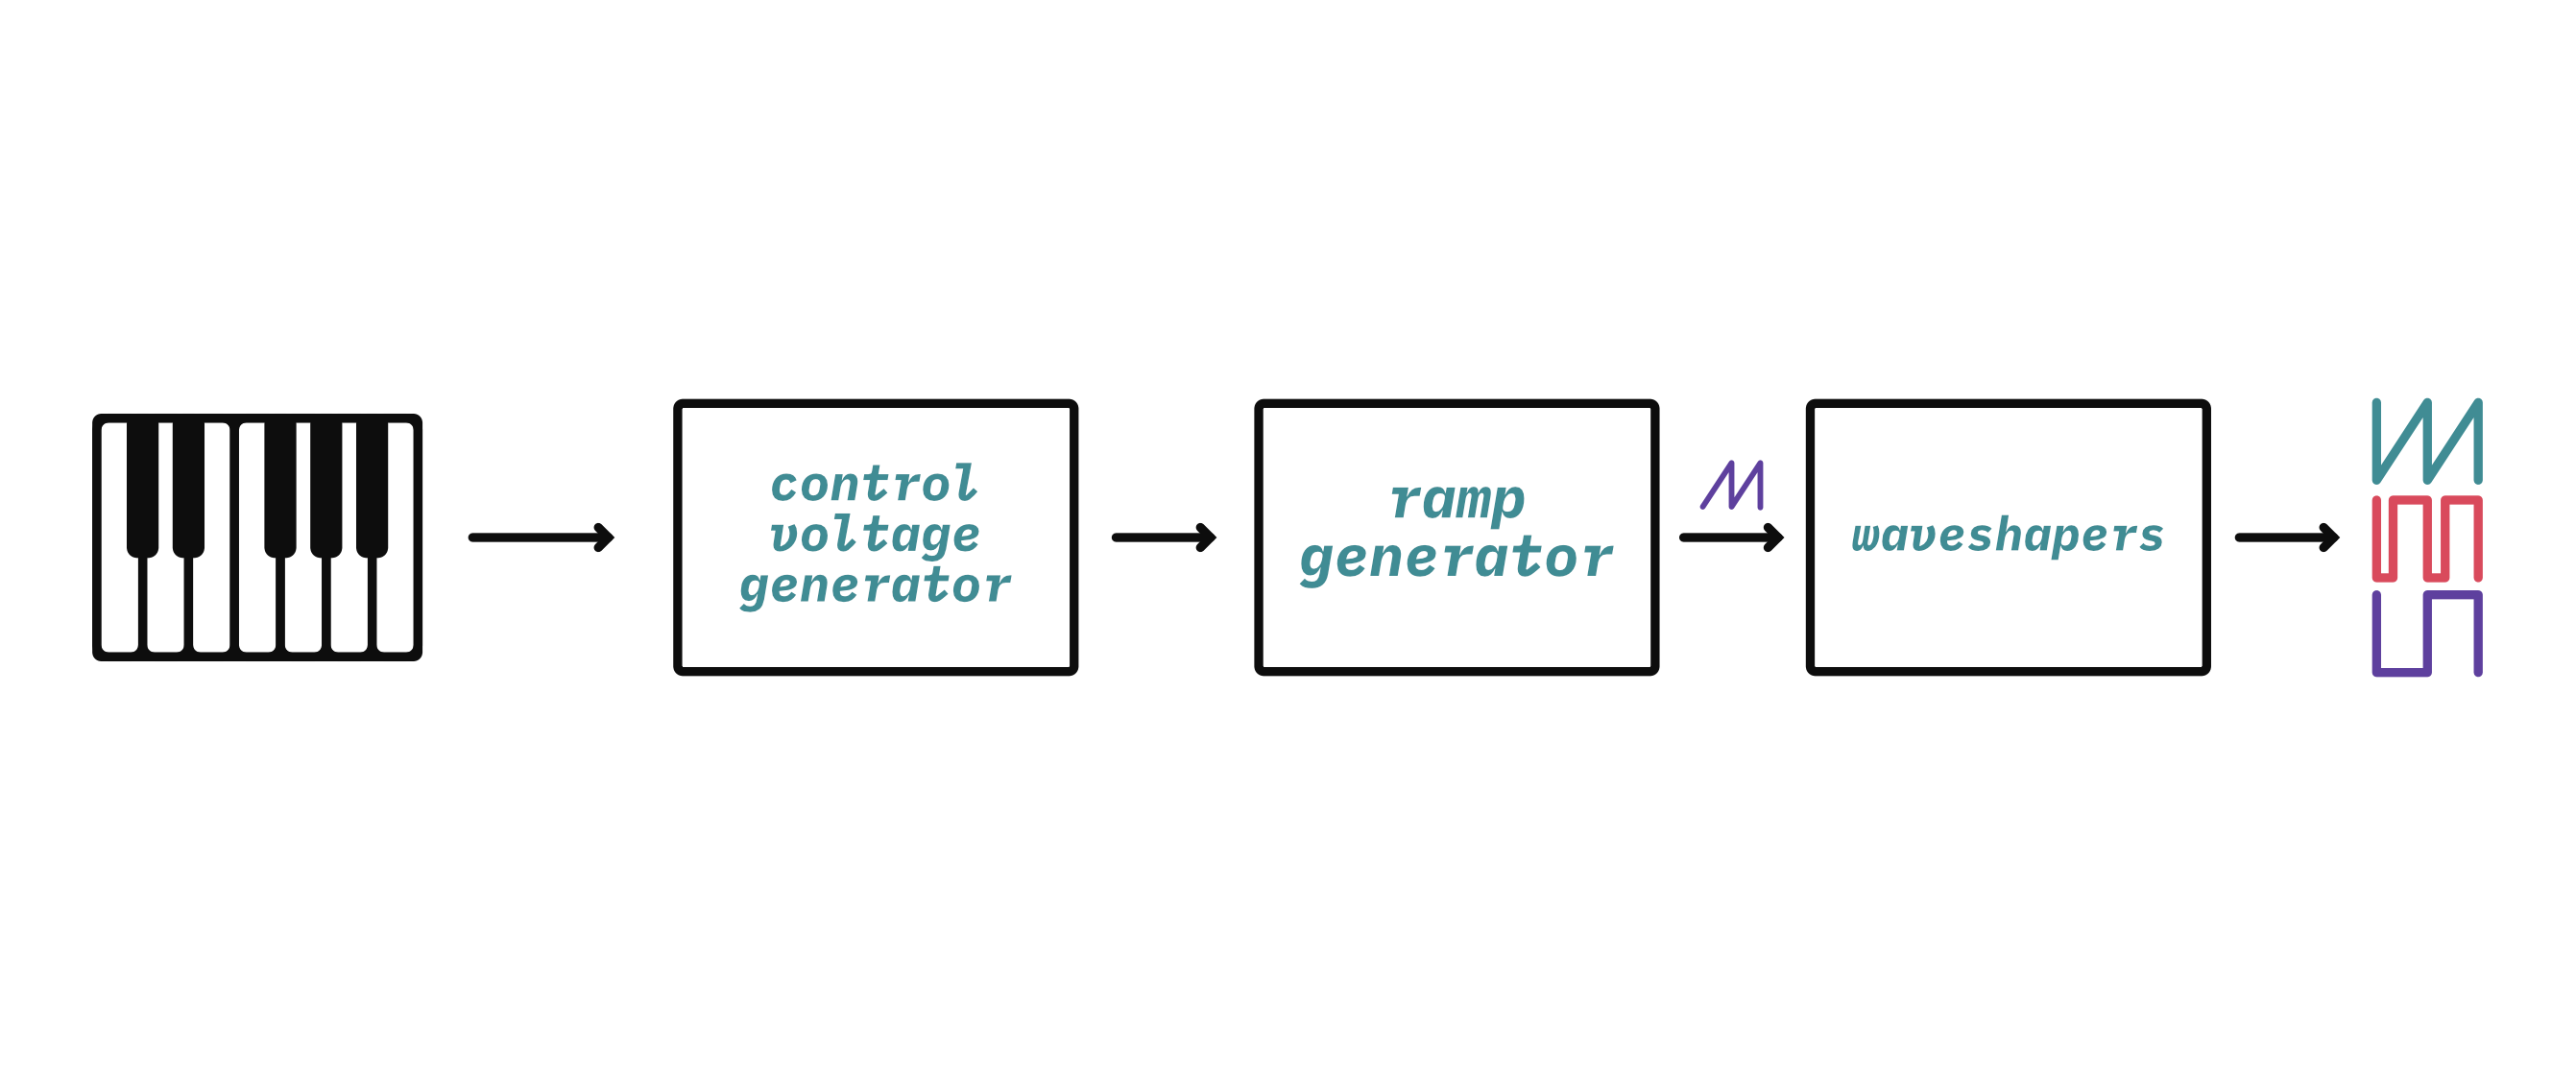 A block diagram of a VCO-based synth